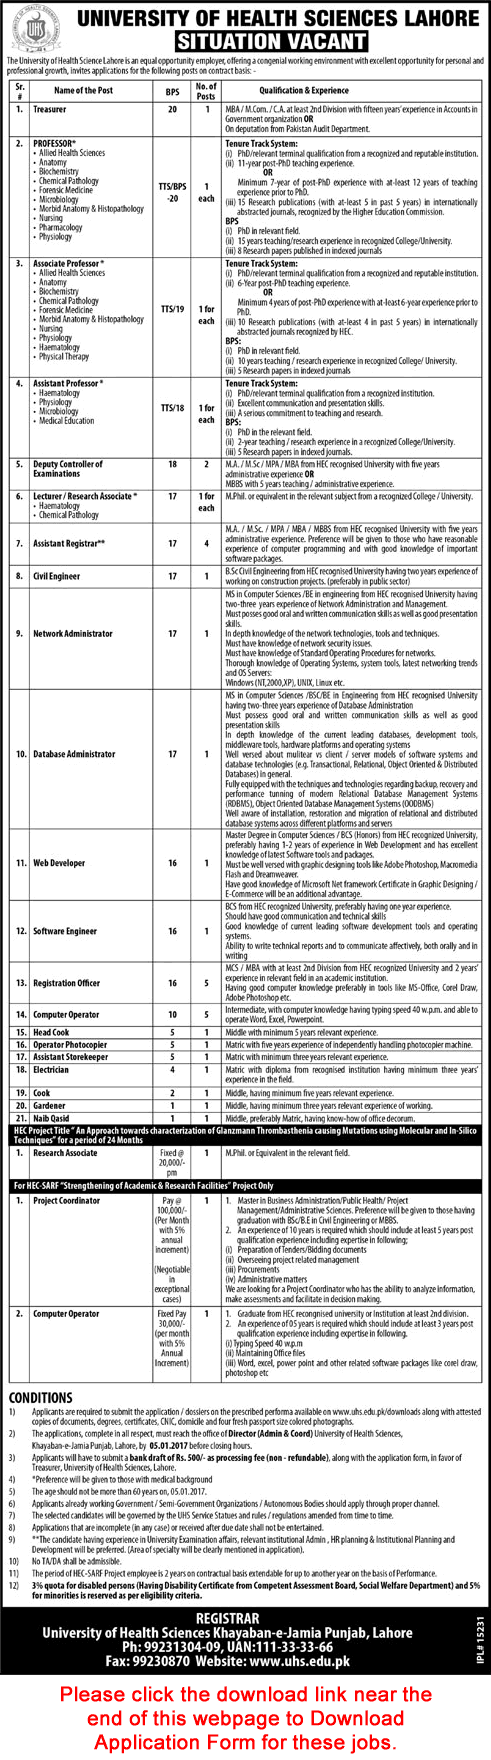 University of Health Sciences Lahore Jobs 2016 December Application Form Teaching Faculty & Others Latest